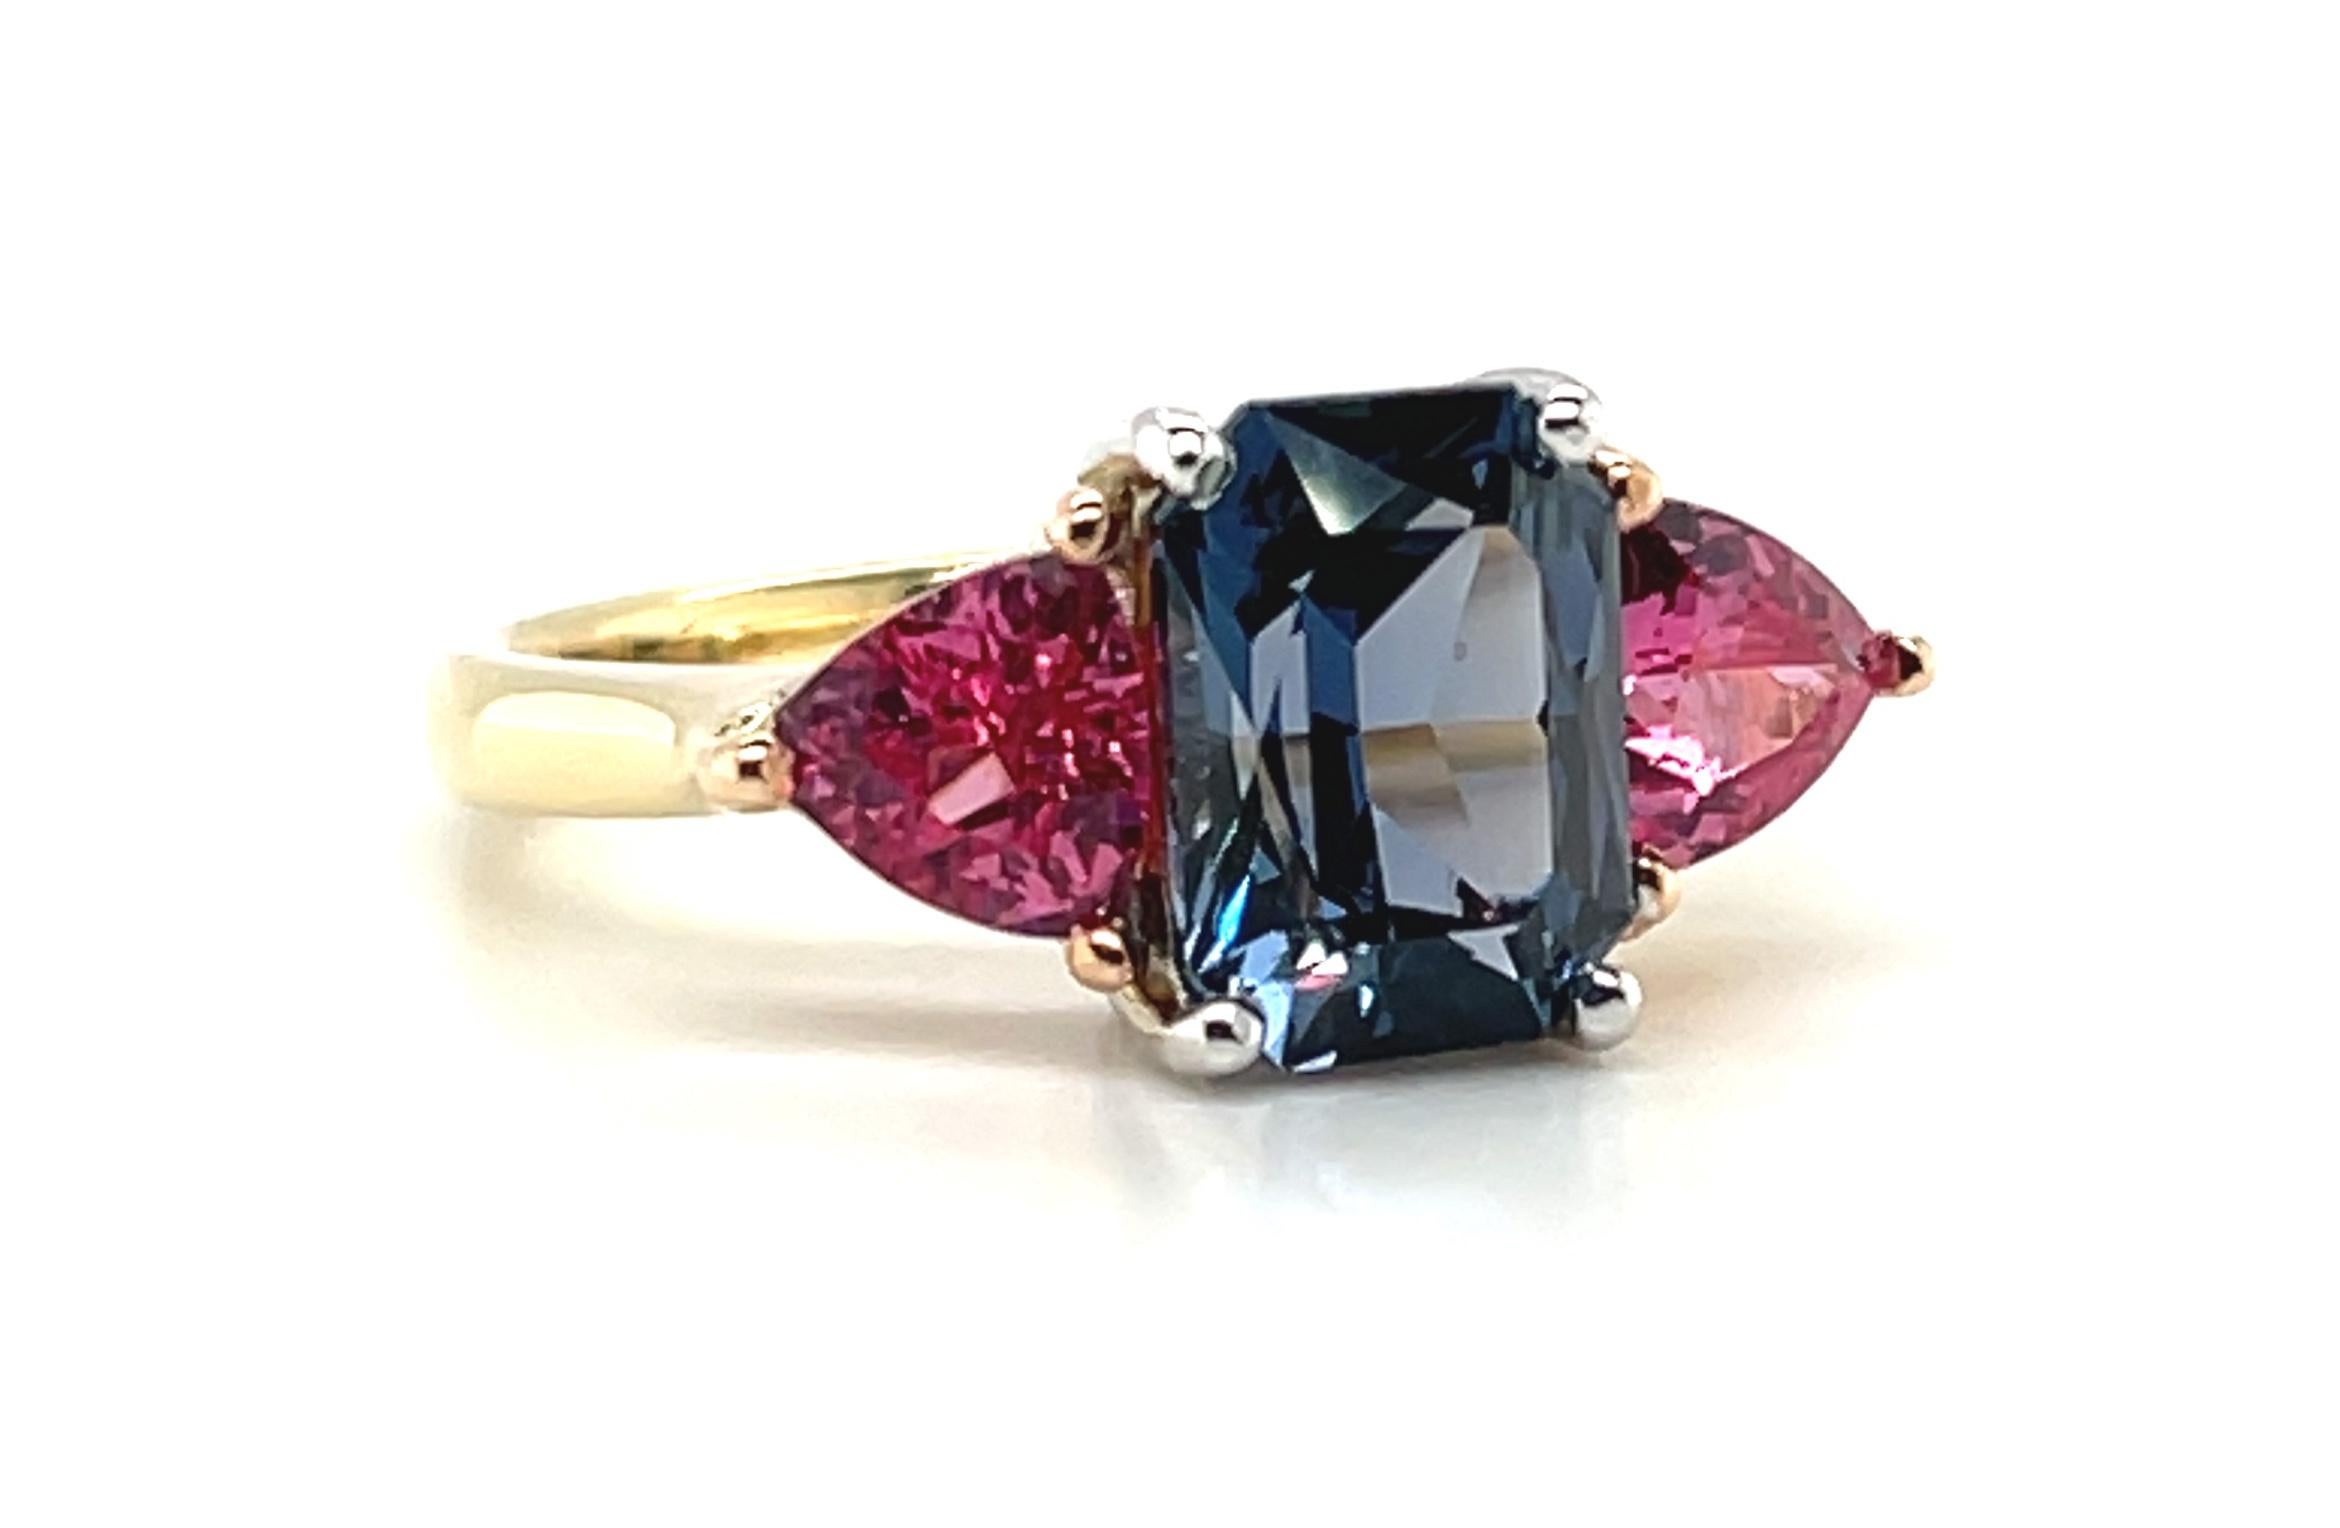 This spectacular three-stone ring features natural spinel gemstones in two vibrant colors! A 2.43 carat, gorgeous, emerald-cut lavender spinel sits front and center, flanked on either side by hot pink 